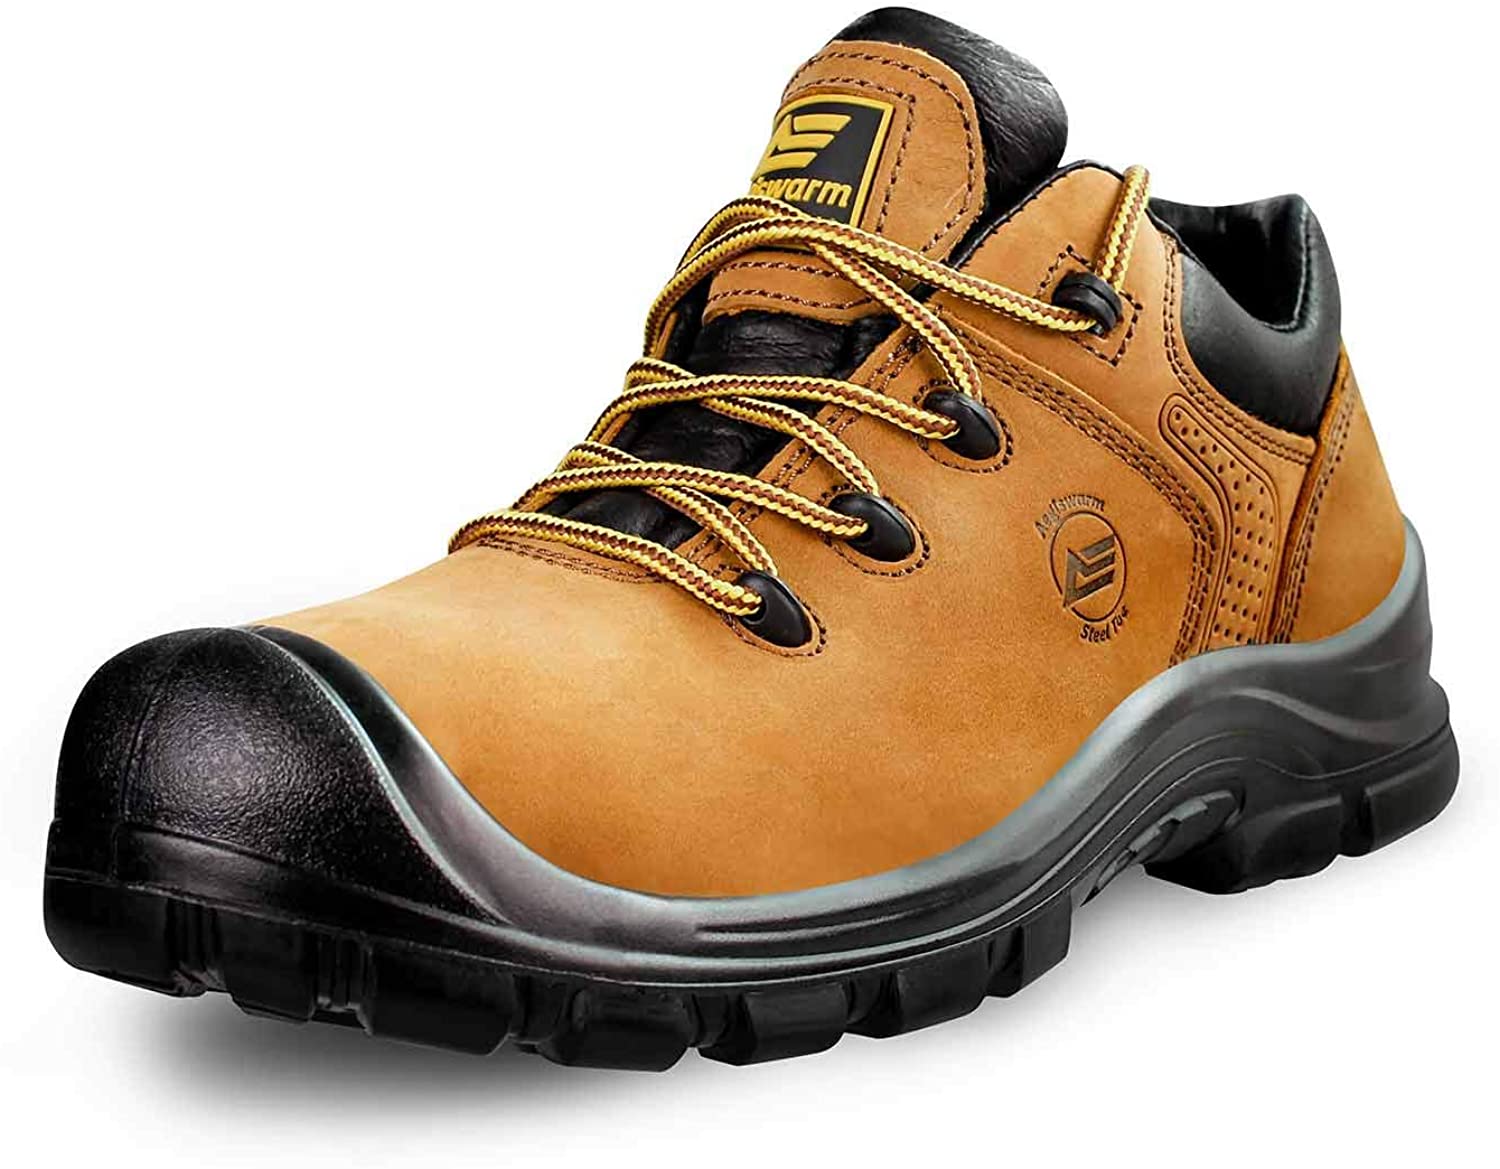 Safety Work Shoes Boots Non Slip Non Oil and Abrasion Resistance Leather Indestructible Boots AEGISWARM 6 Steel Toe Work Boots for Men Waterproof 